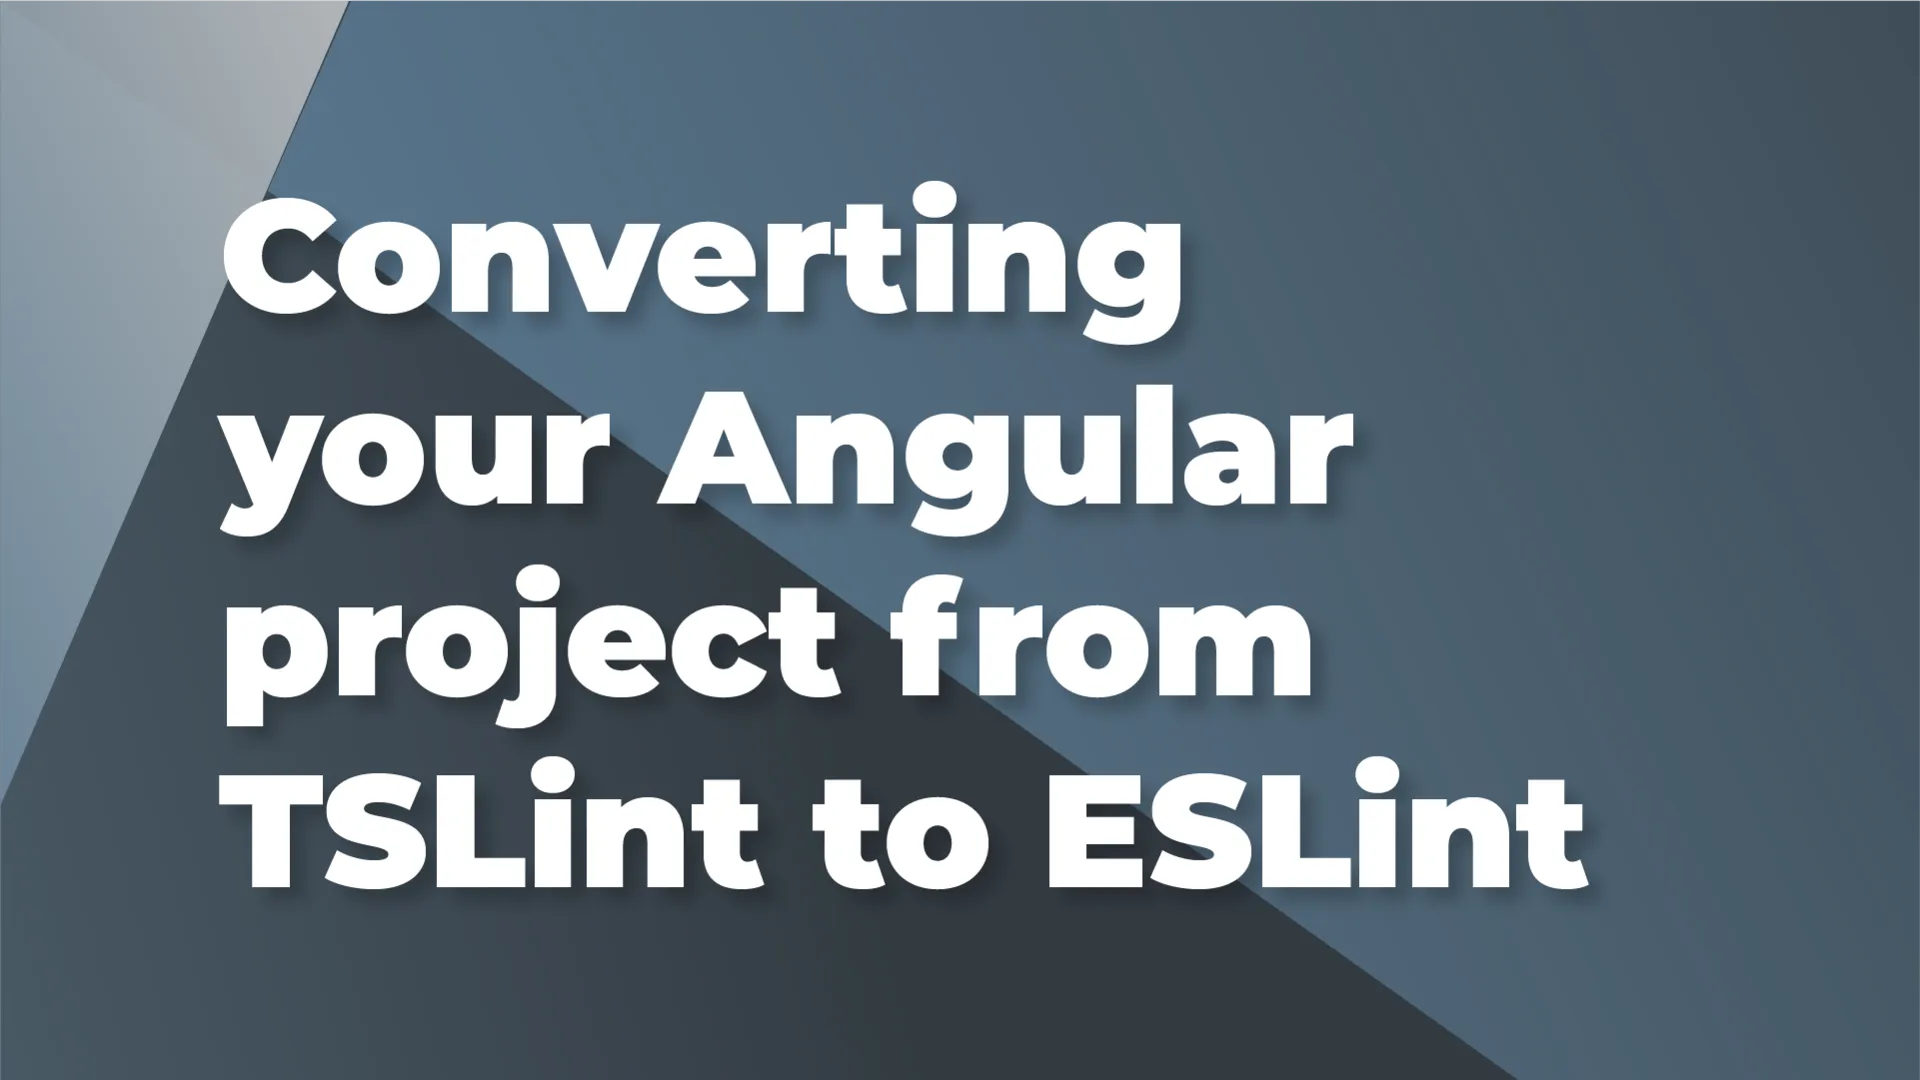 Converting your Angular project from TSLint to ESLint